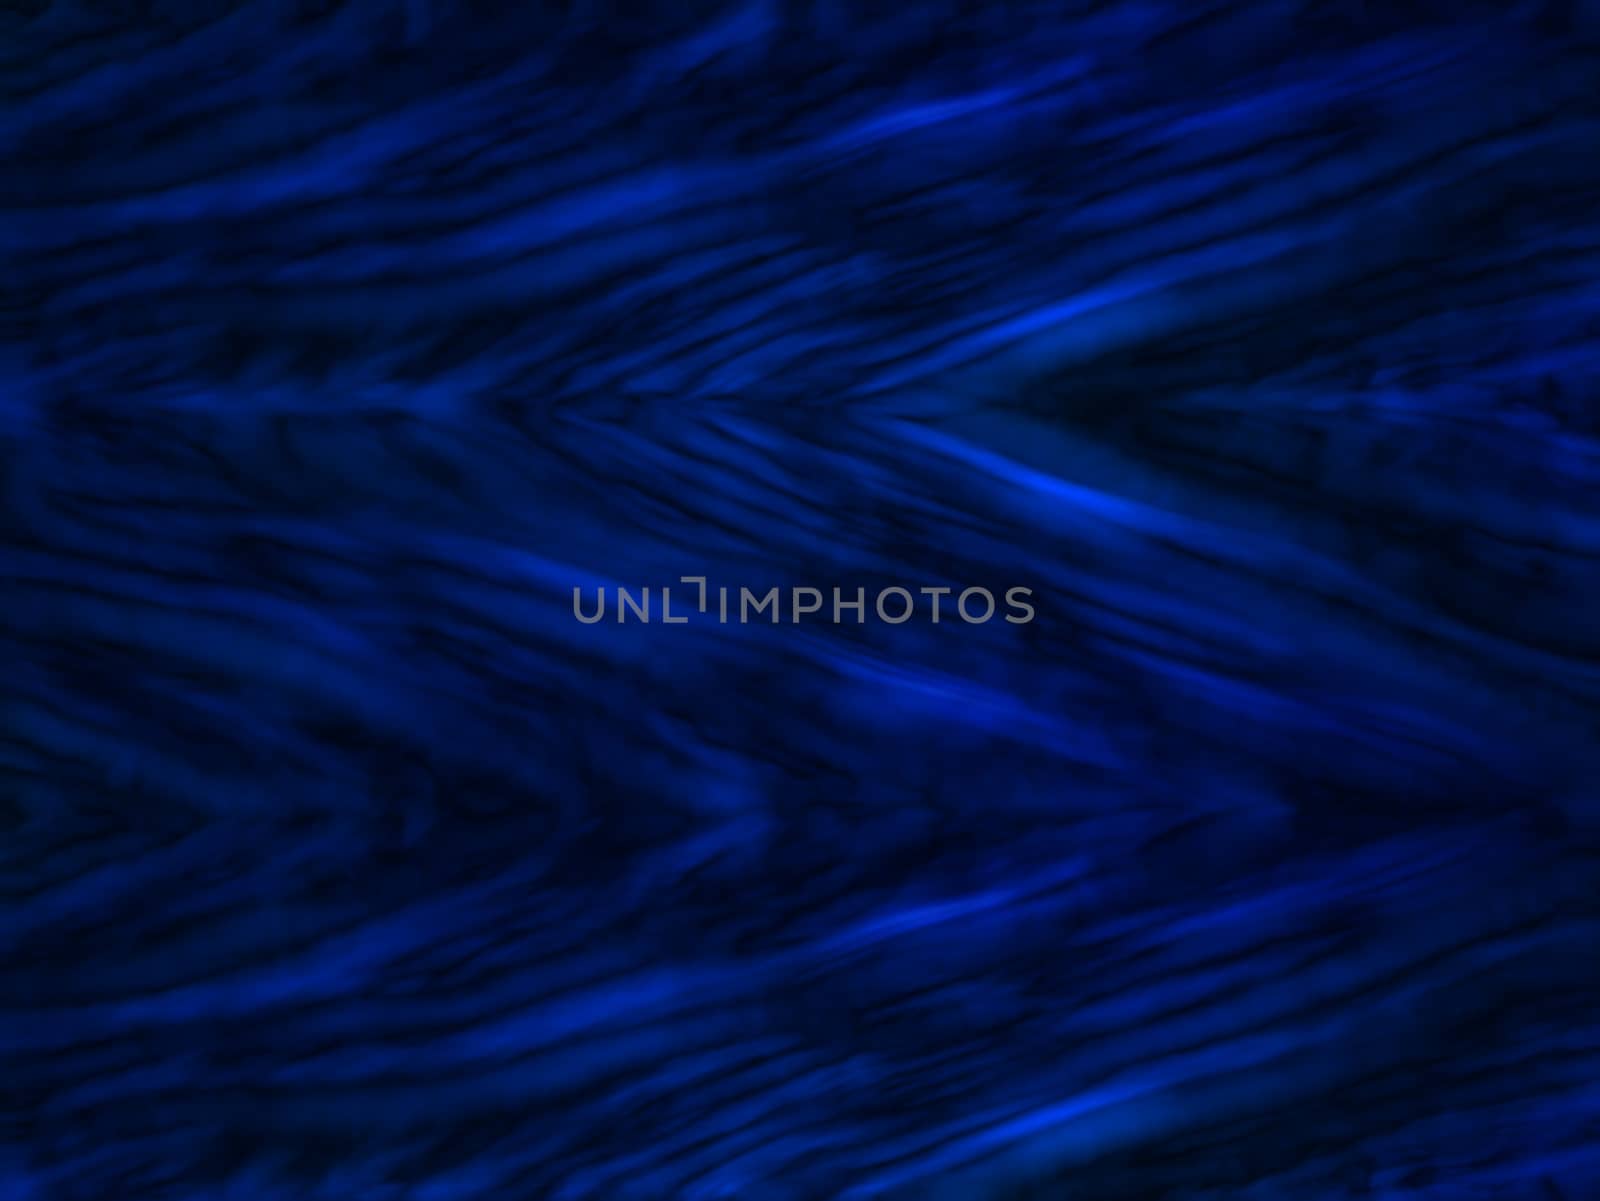 Abstract background with texture curves bands of blue and black